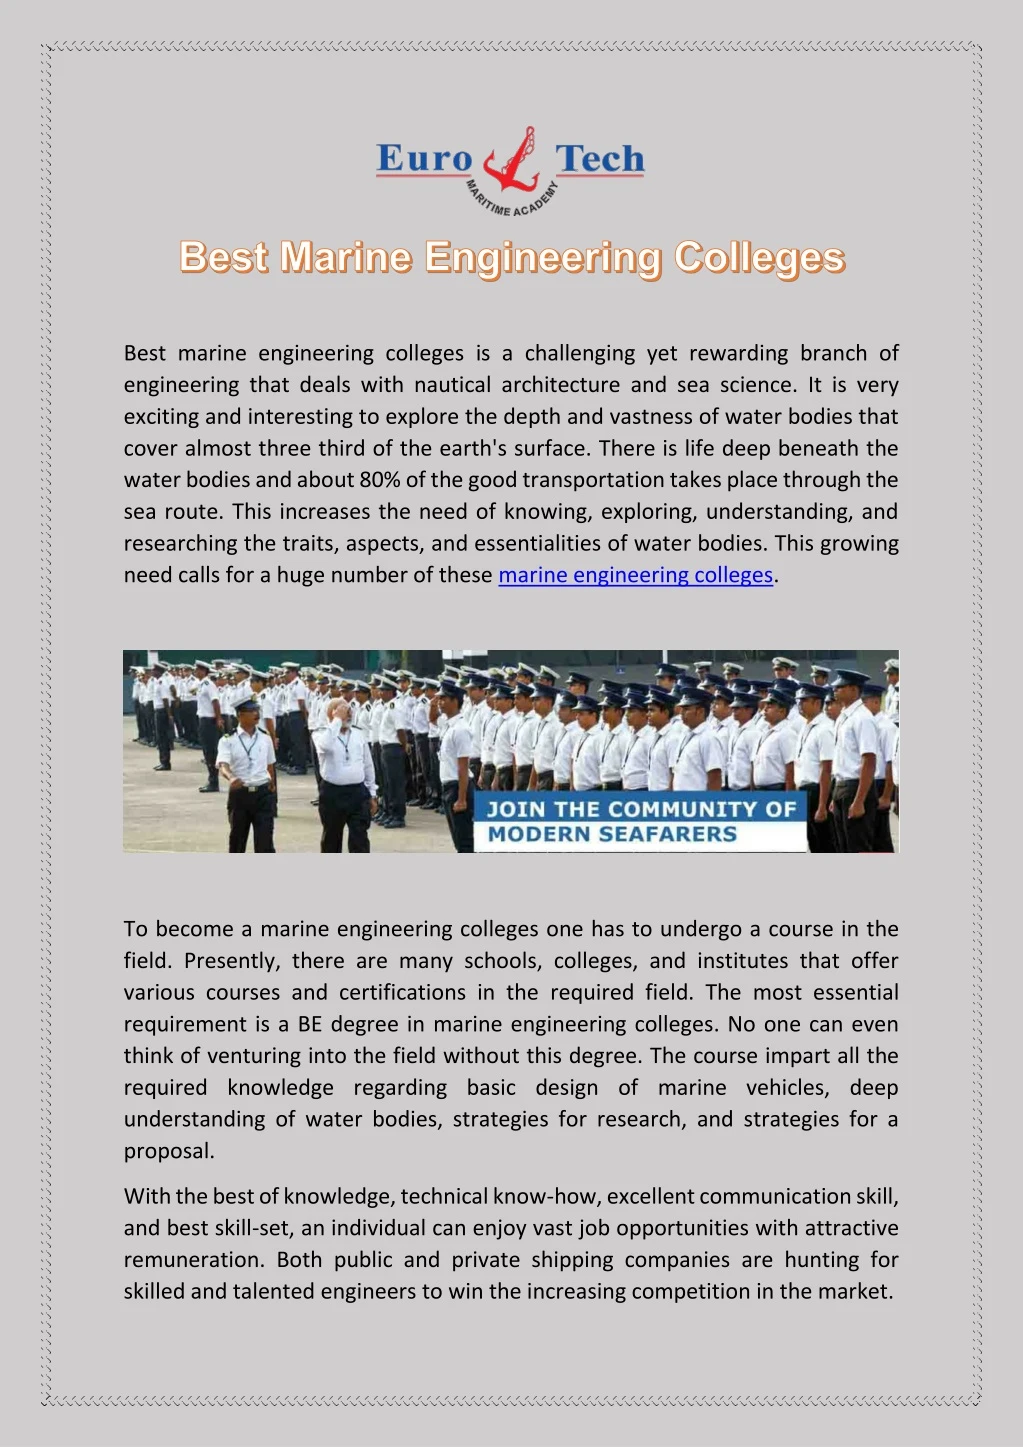 best marine engineering colleges is a challenging